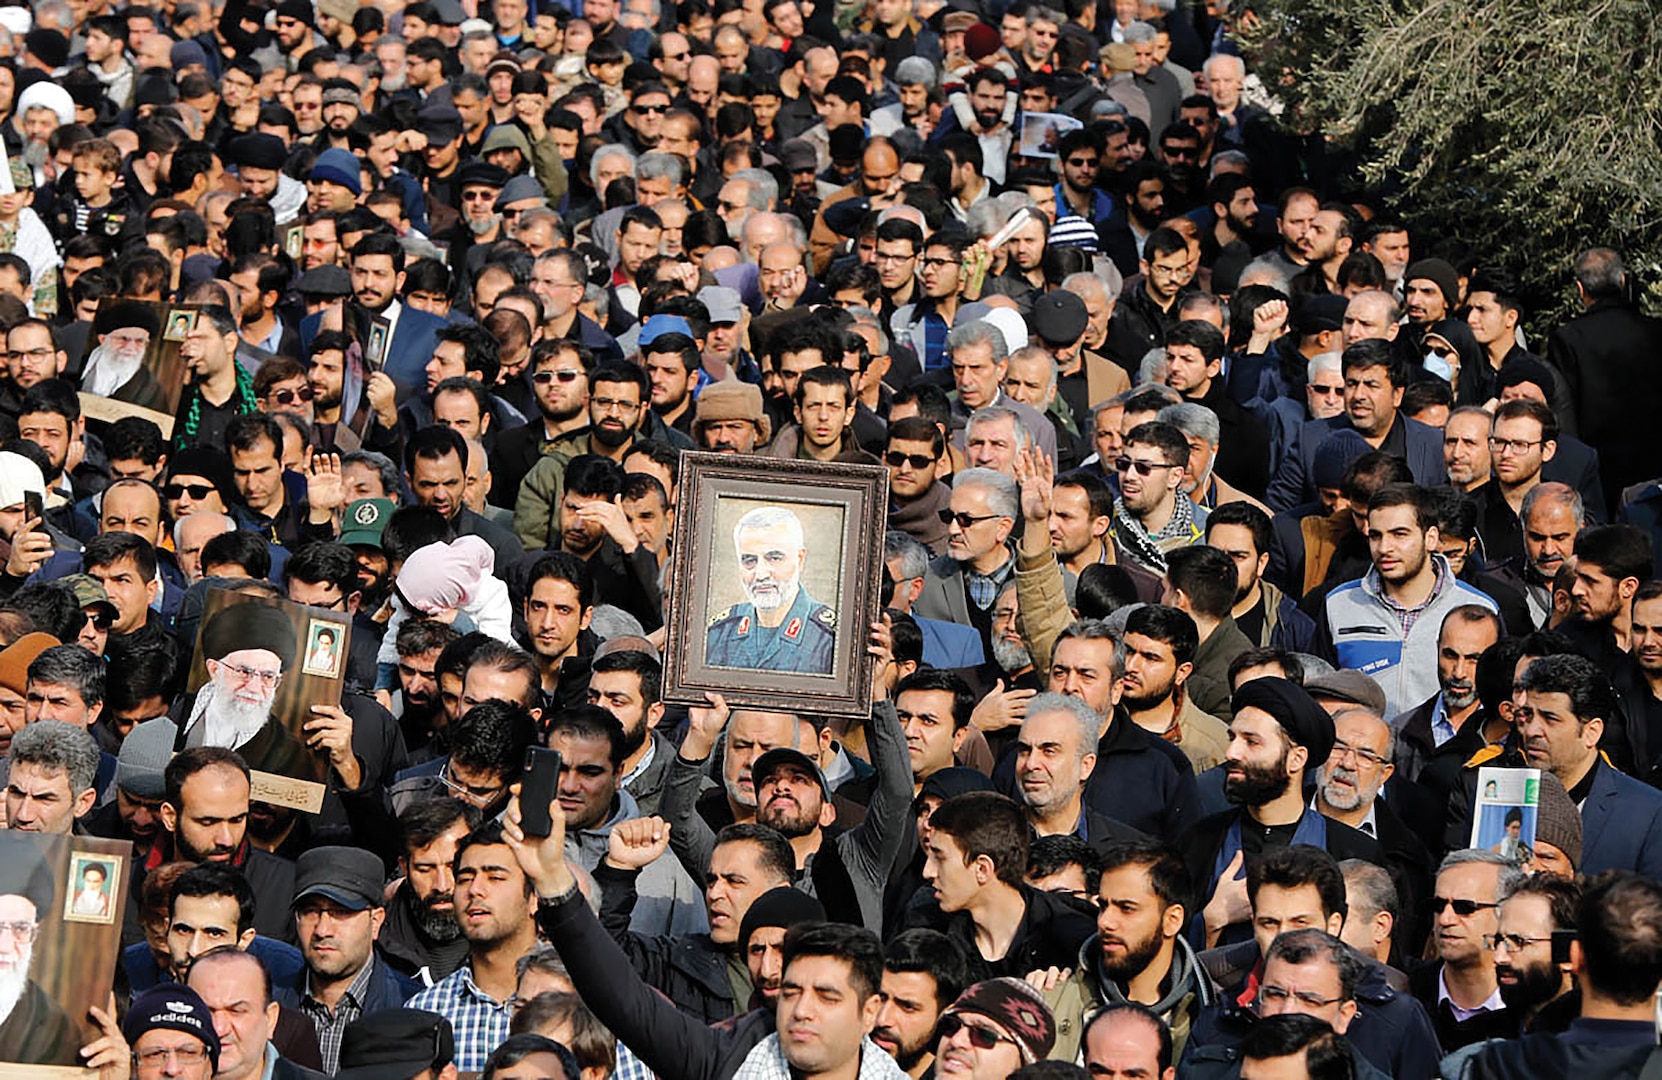 Funeral of Qassem Soleimani killed in an American drone attack. Soleimani was an Iranian major general in the Islamic Revolutionary Guard Corps (IRGC).” (saeediex / Shutterstock.com, Jan 7, 2020)